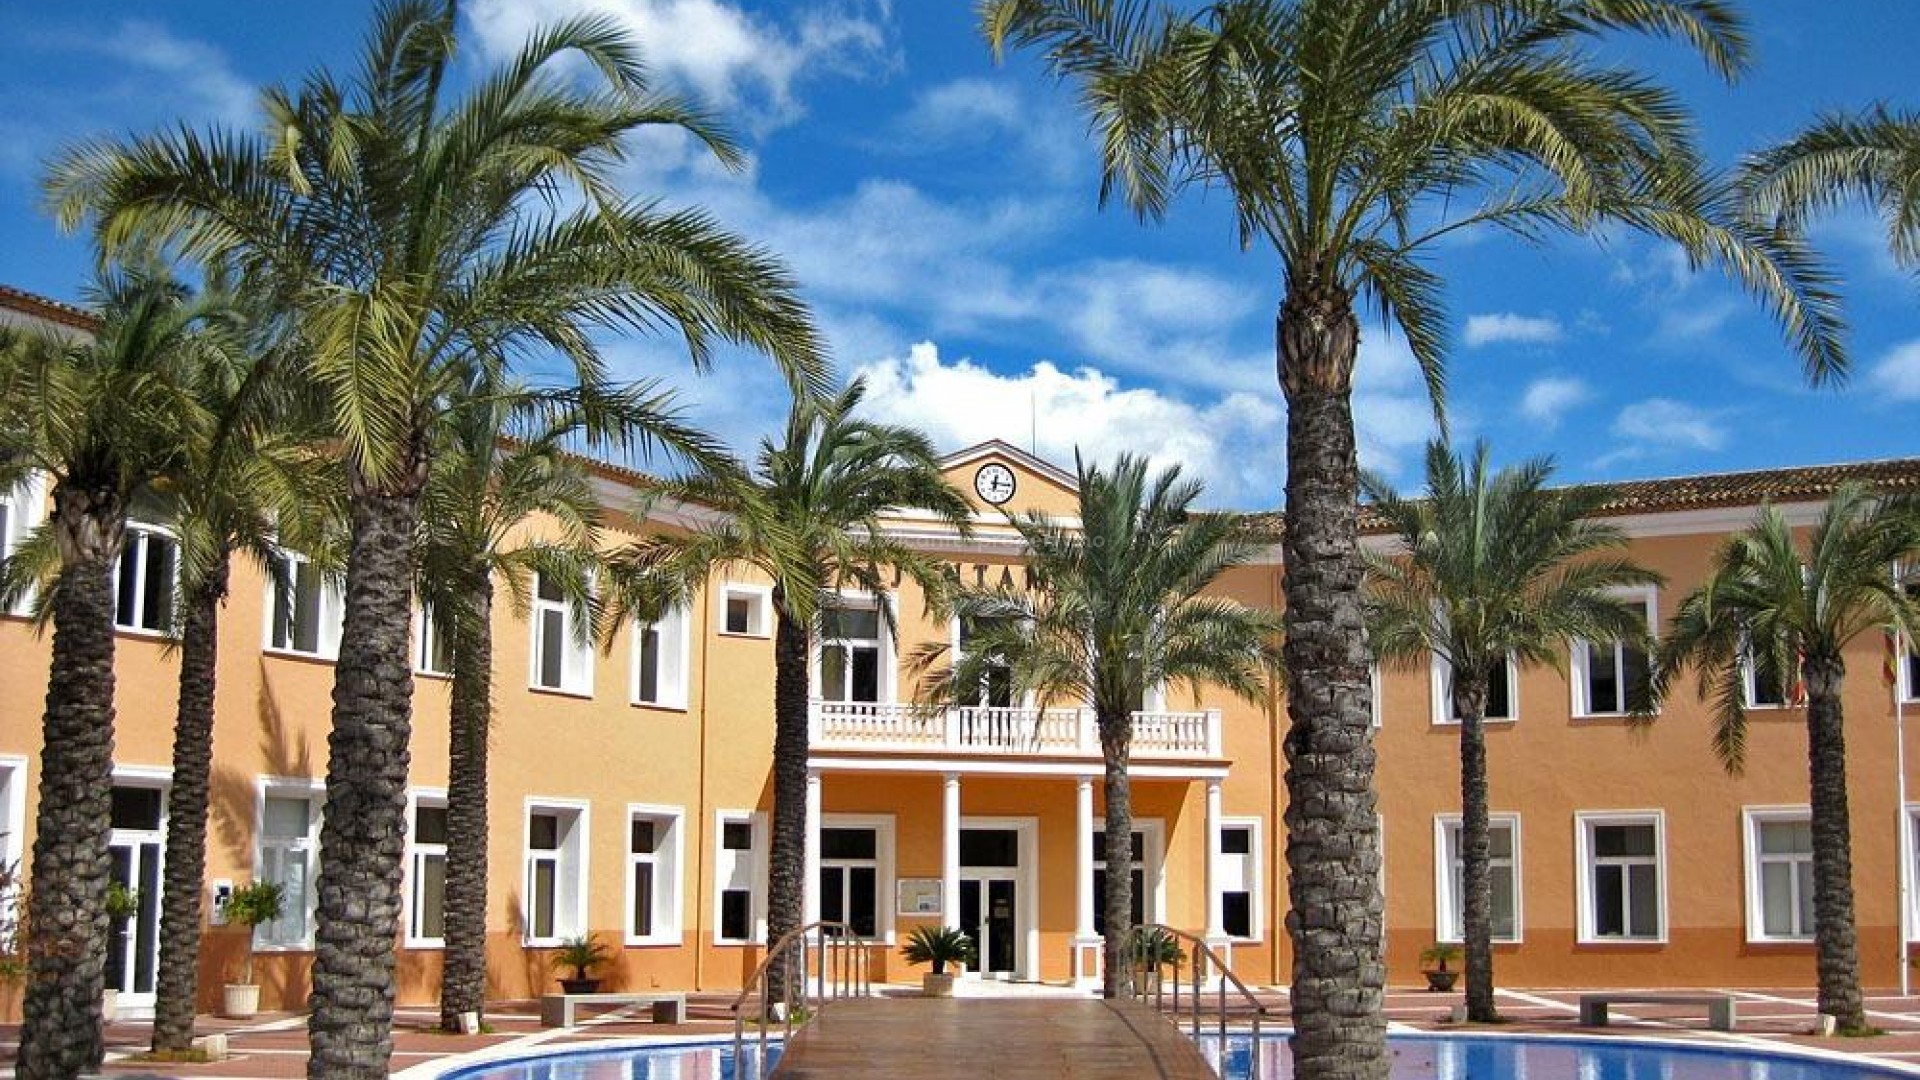 Homes in El Vergel, Denia, apartments and penthouses with 1, 2 and 3 bedrooms, Several swimming pools in the residential complex,